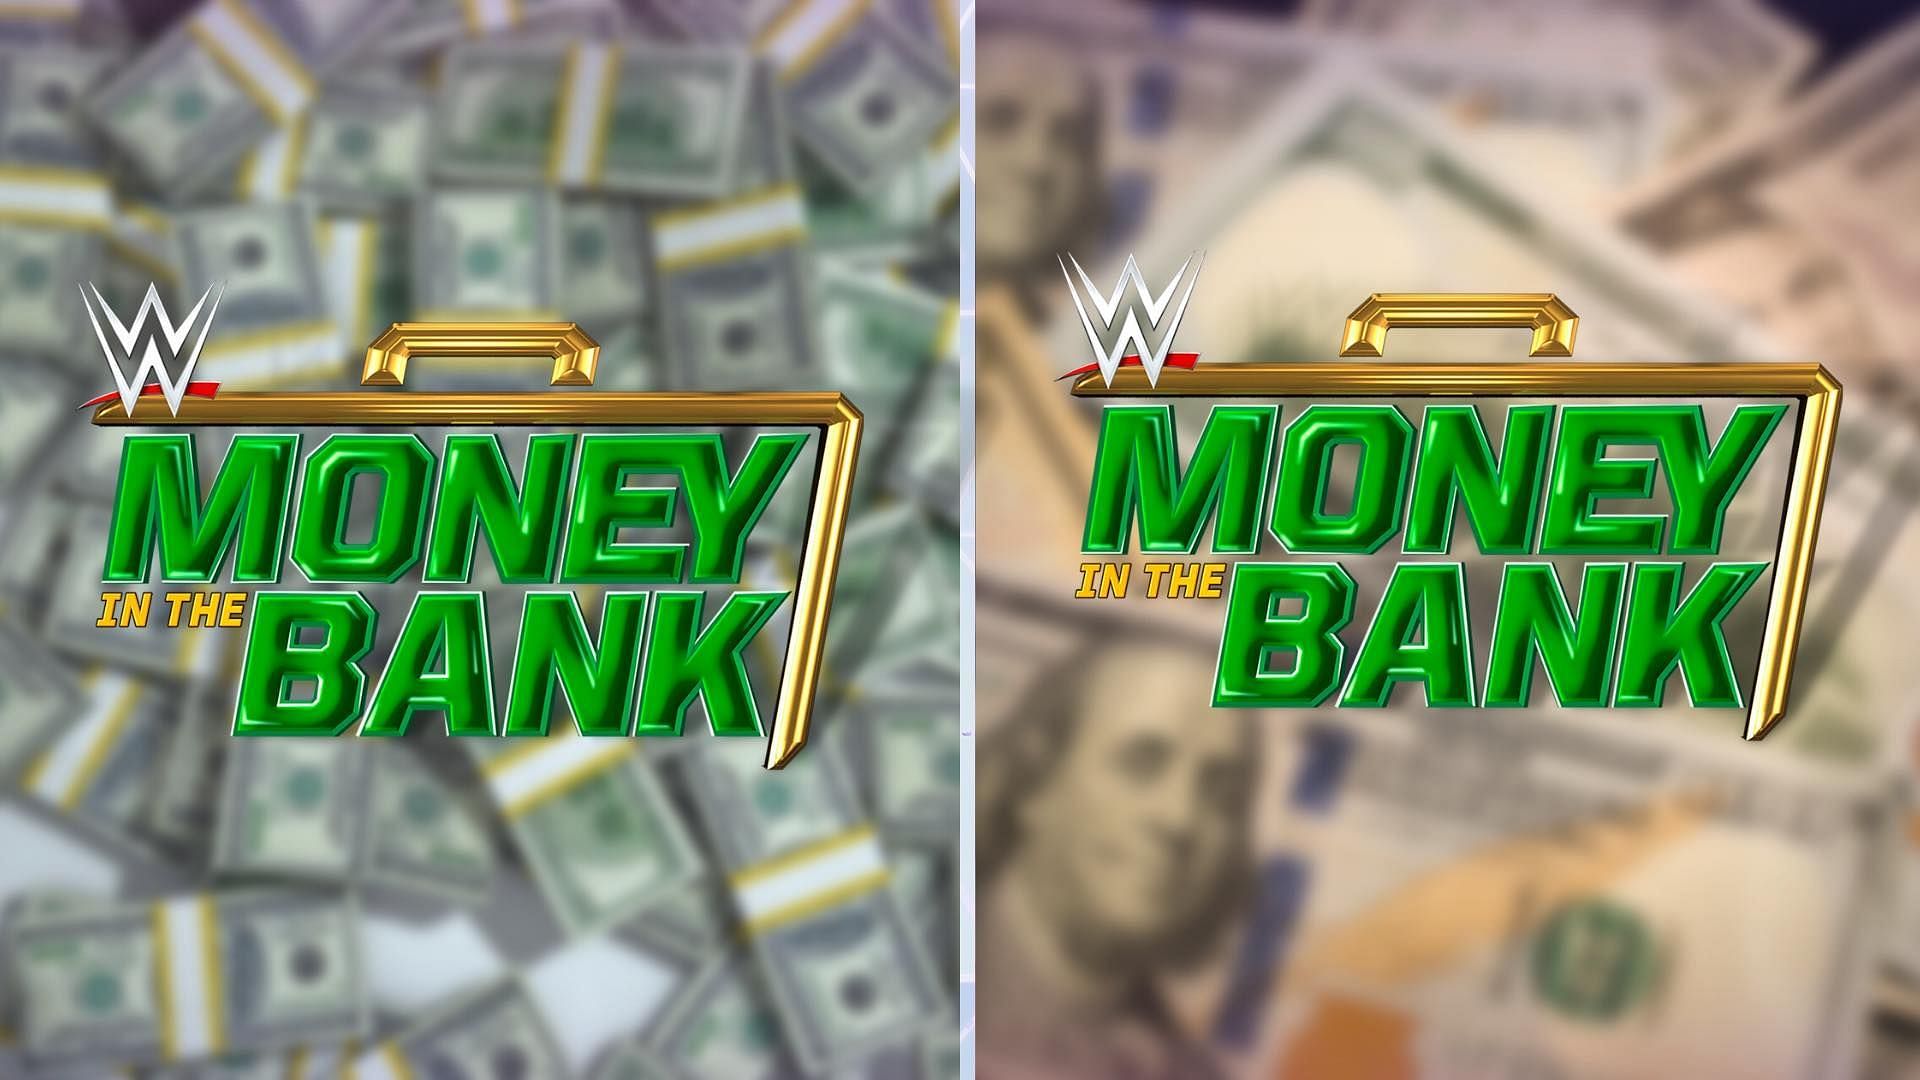 Money in the Bank logo